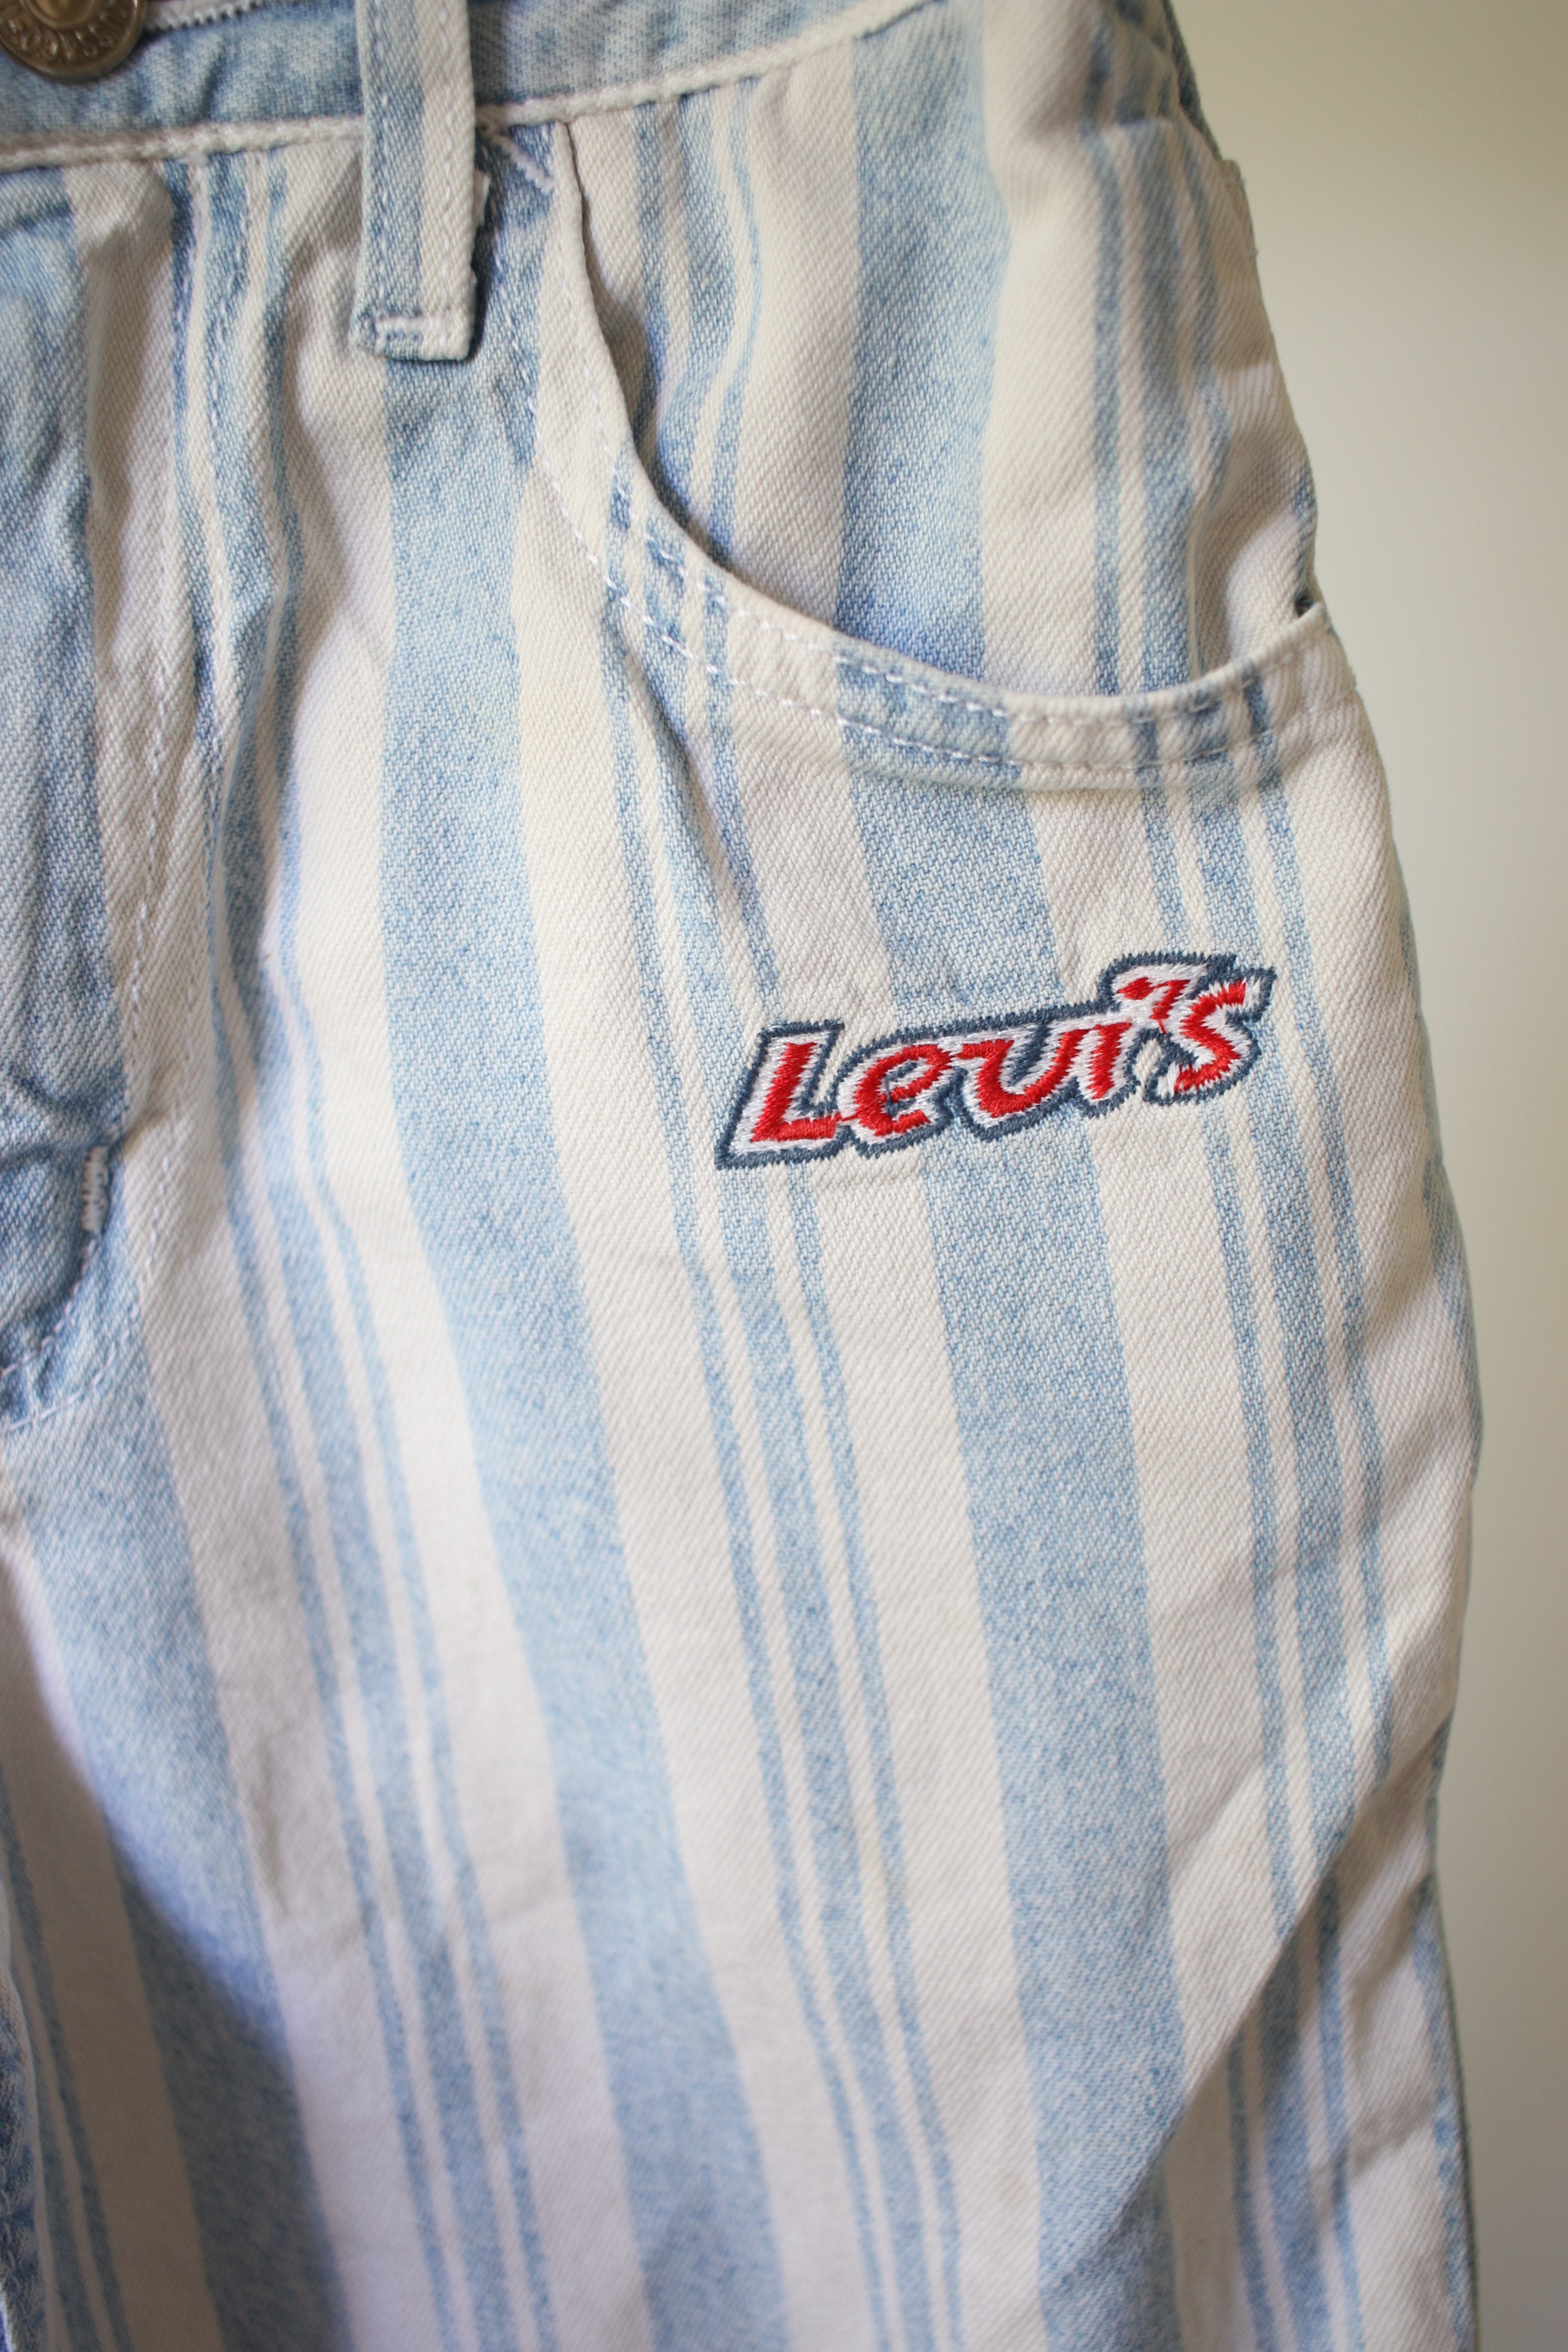 Vintage striped Levi's jeans  - size 4 years